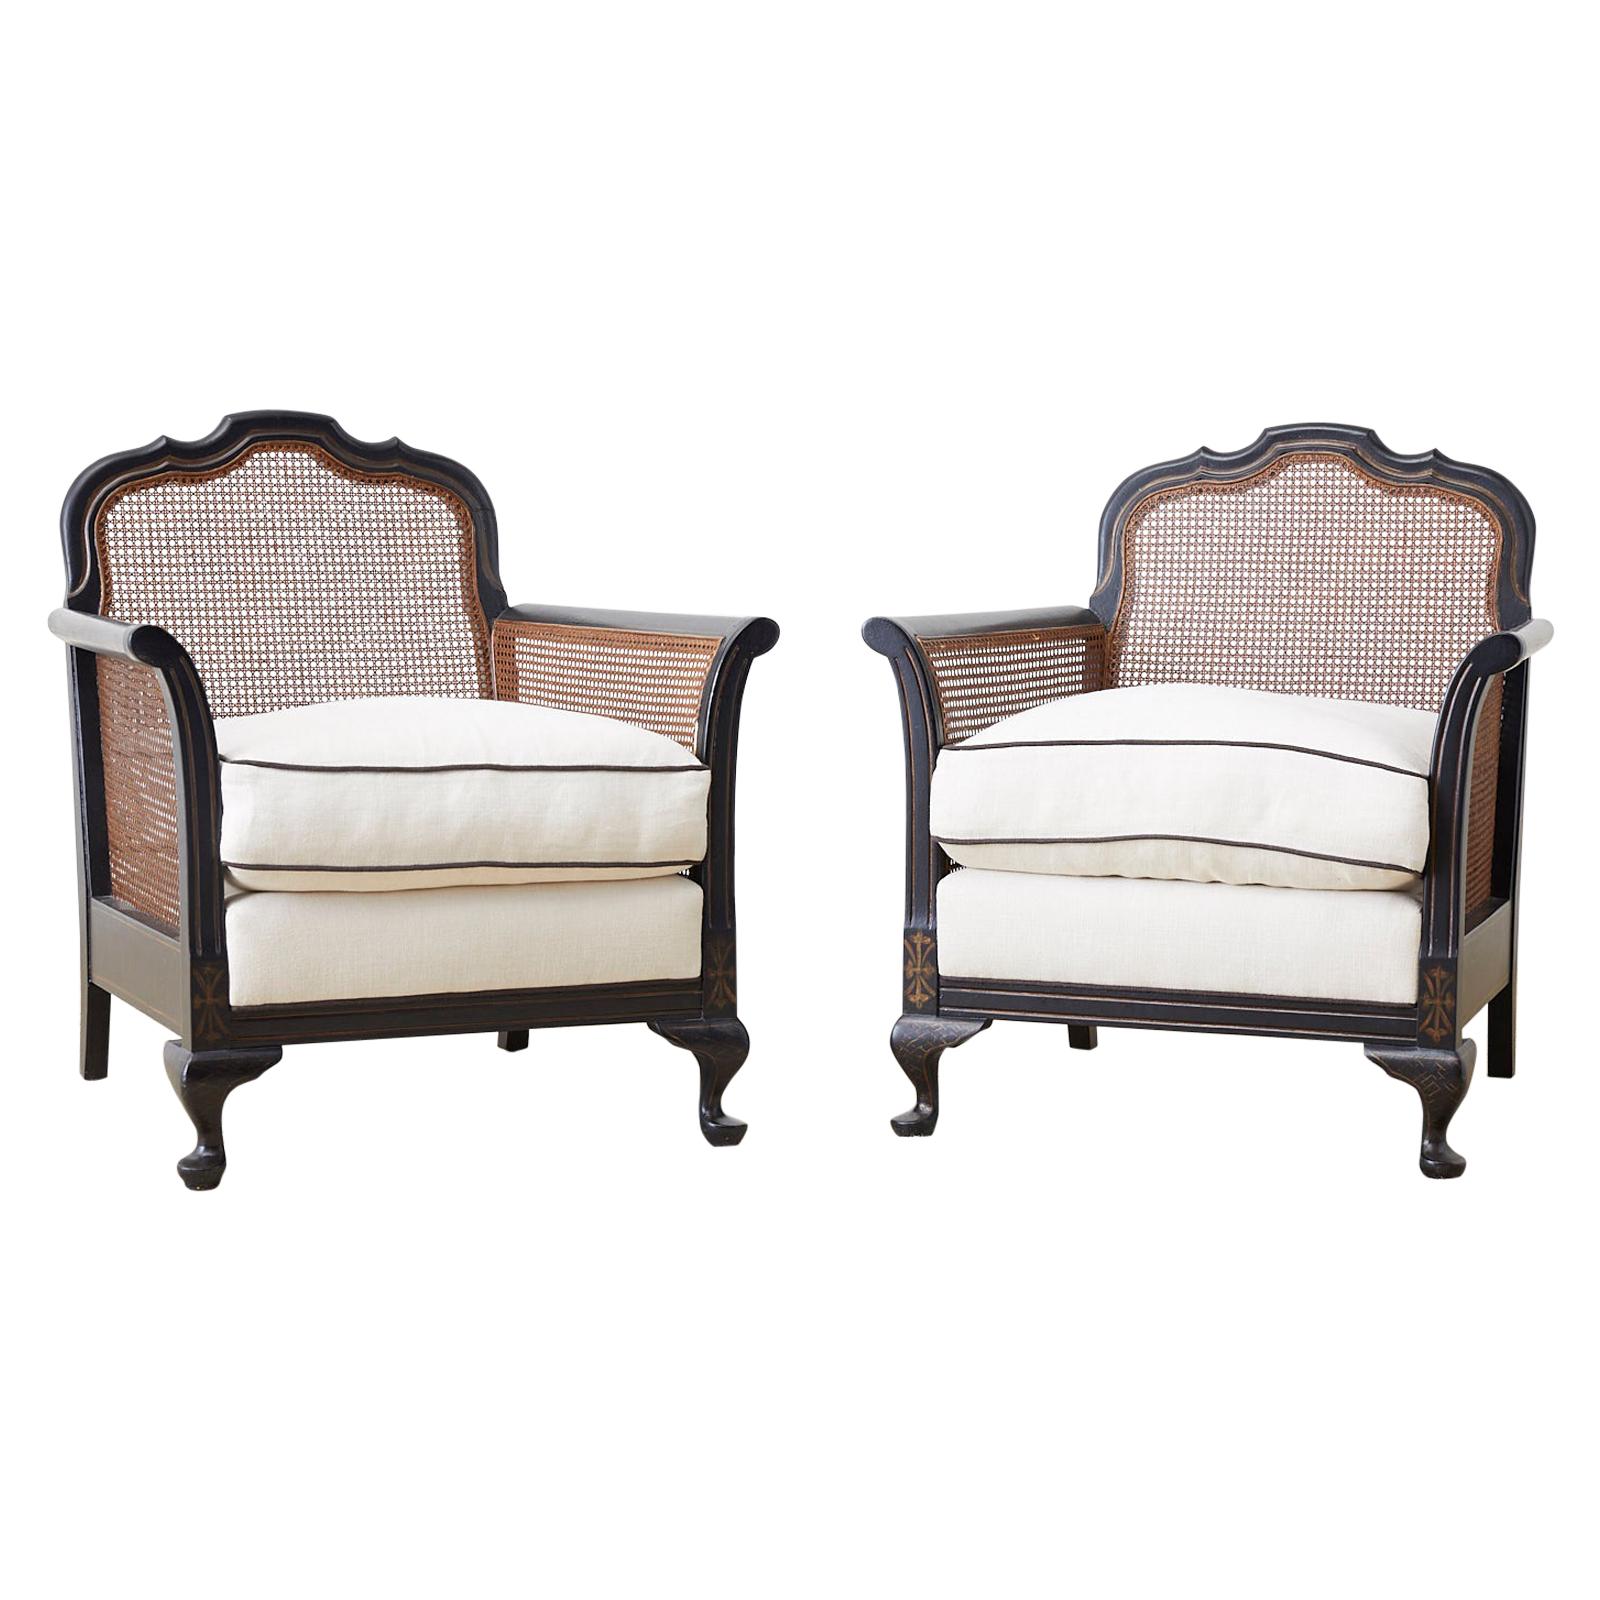 Pair of Ebonized Cane Bergere Lounge Chairs with Linen